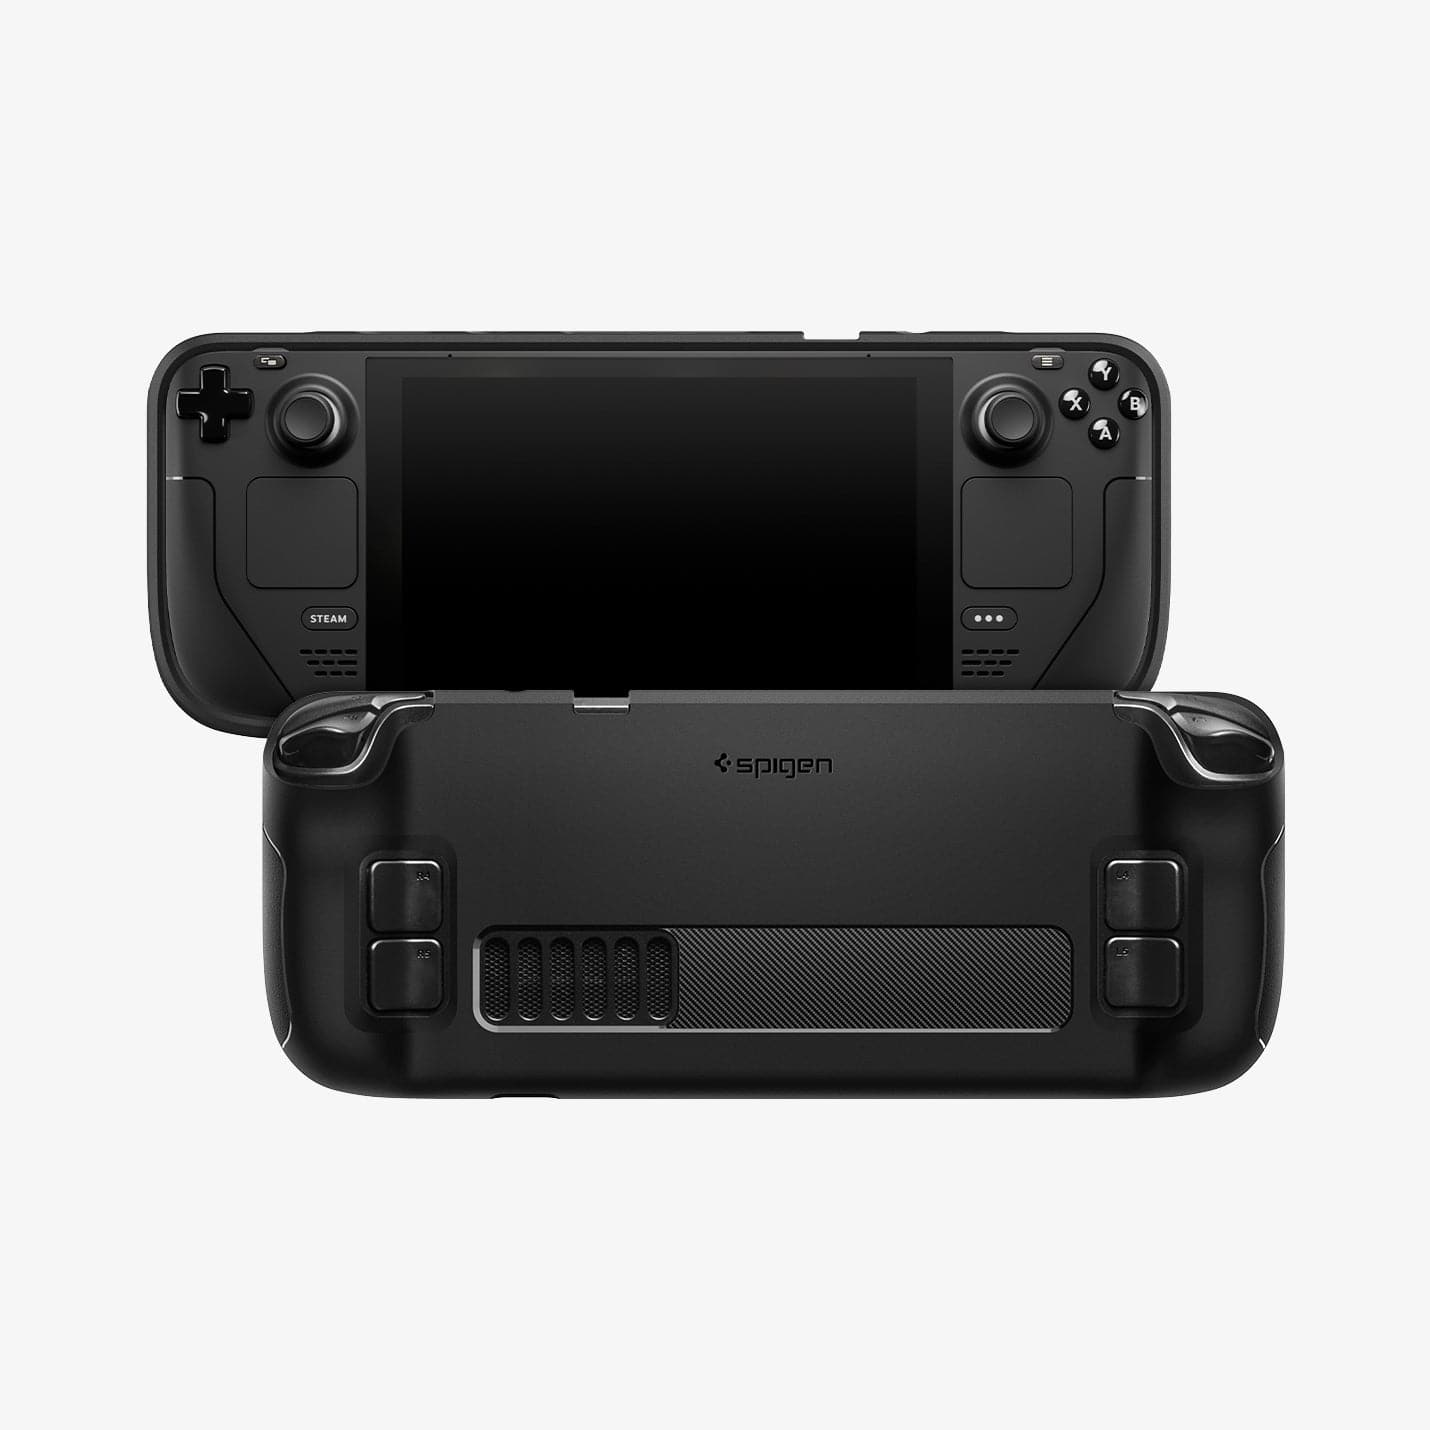 Wholesale steam deck rugged armor protective case TPU cover